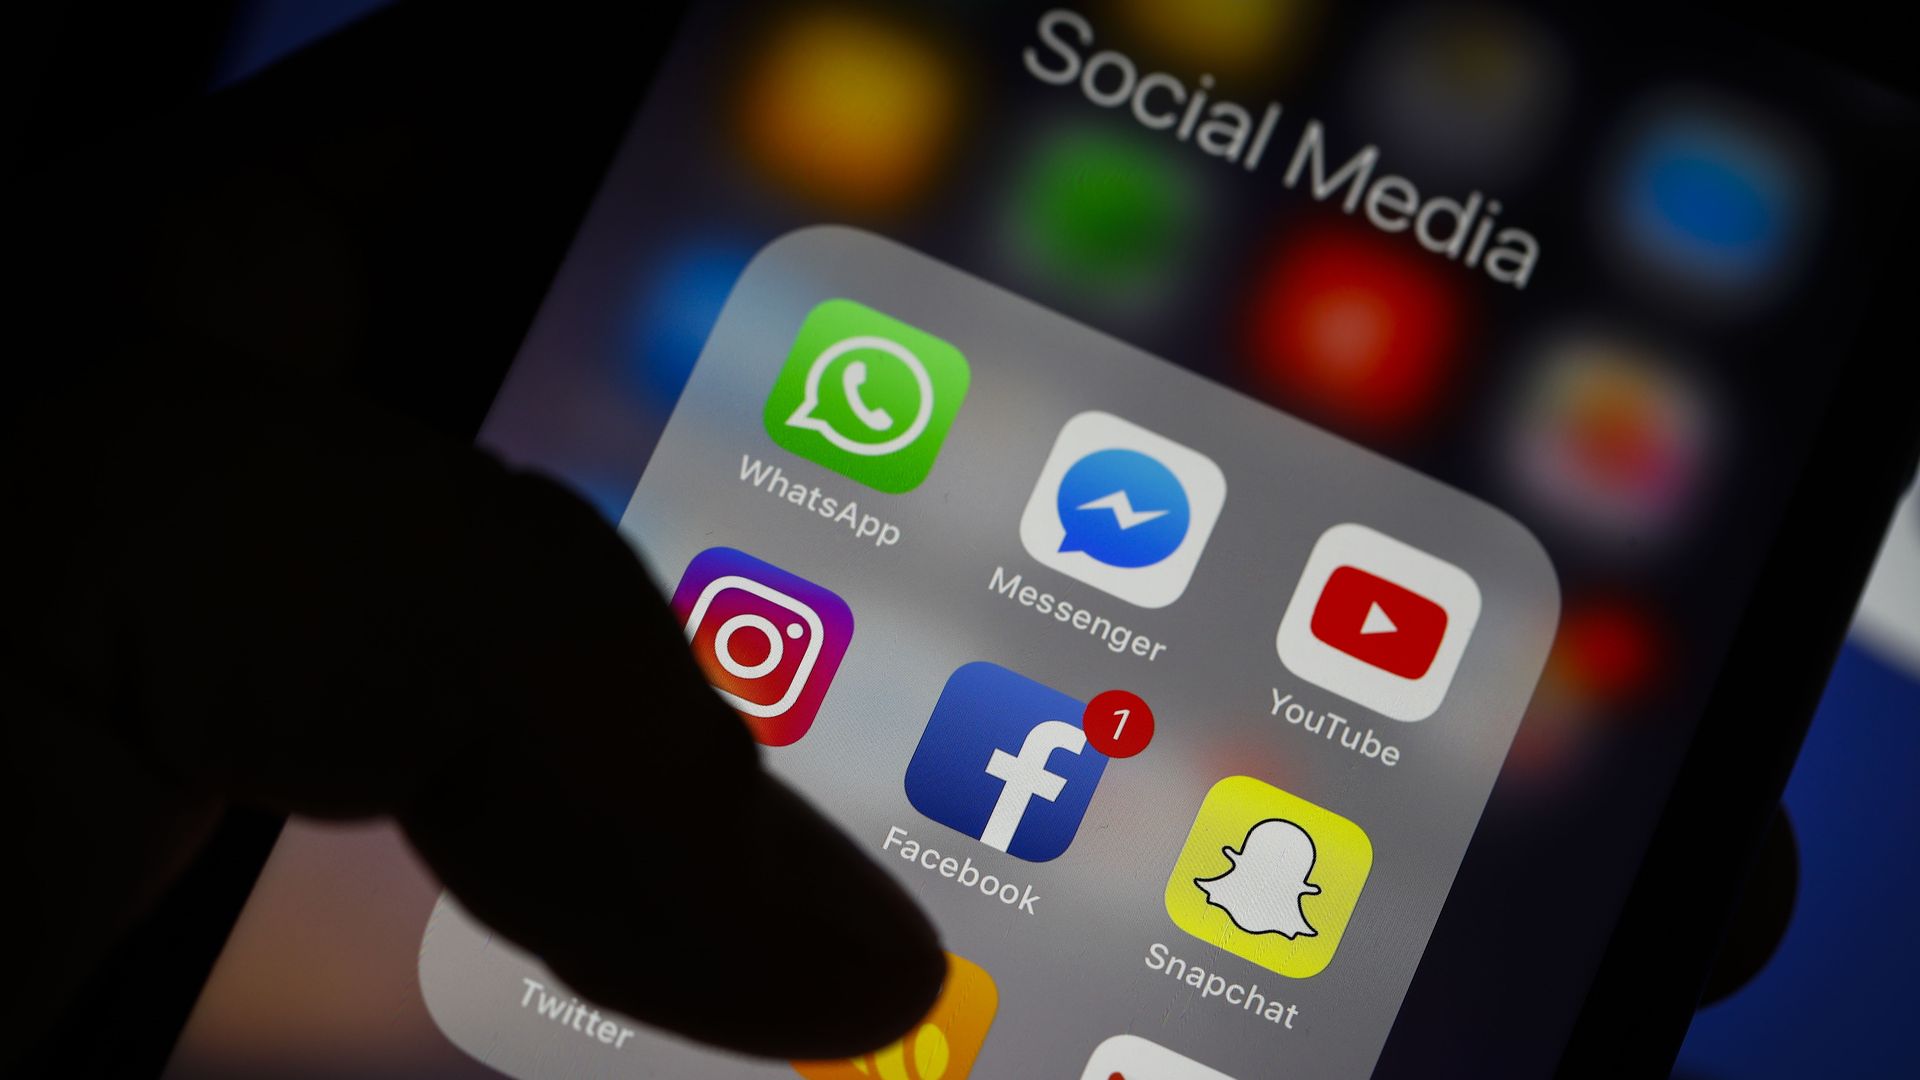 Photo of social media app icons on a smartphone screen